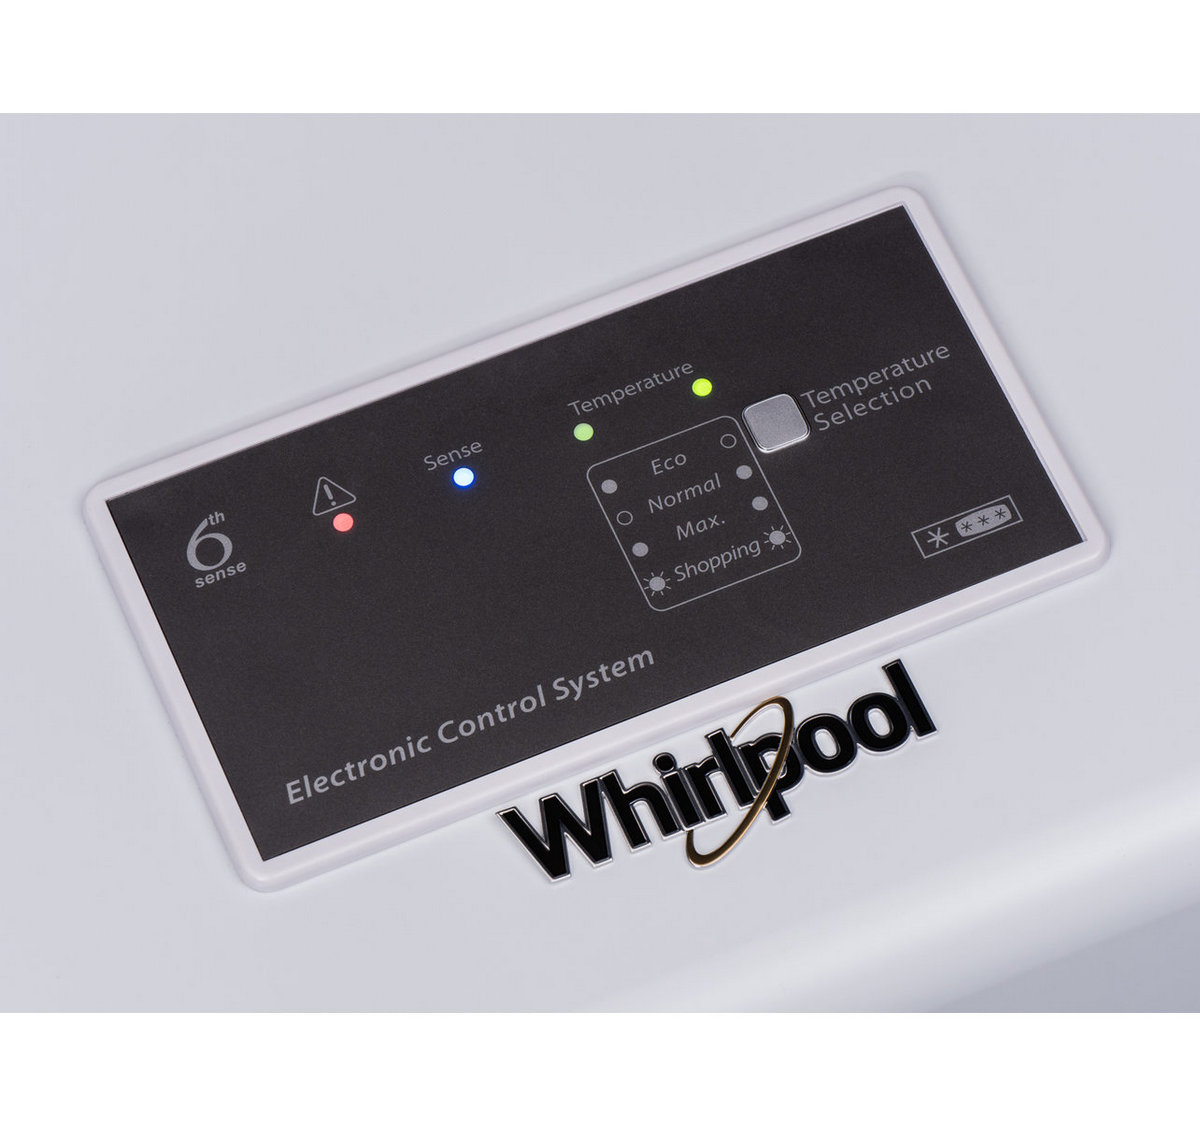 WHIRLPOOL WH 1410 A+ E